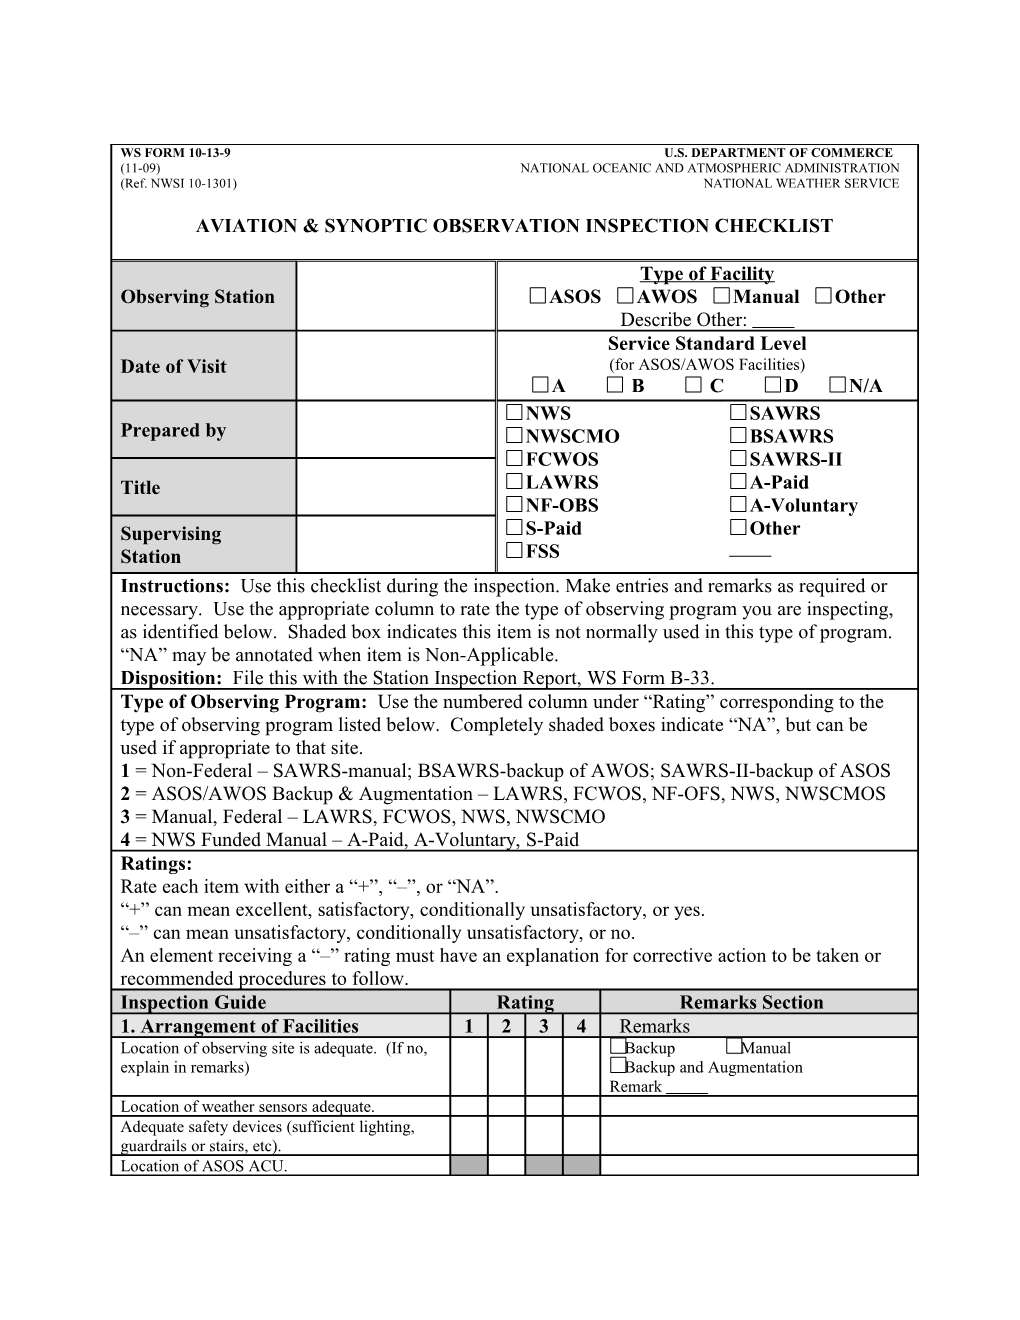 AVIATION & SYNOPTIC OBSERVATION INSPECTION CHECKLIST (Con T) Page 5 of 5